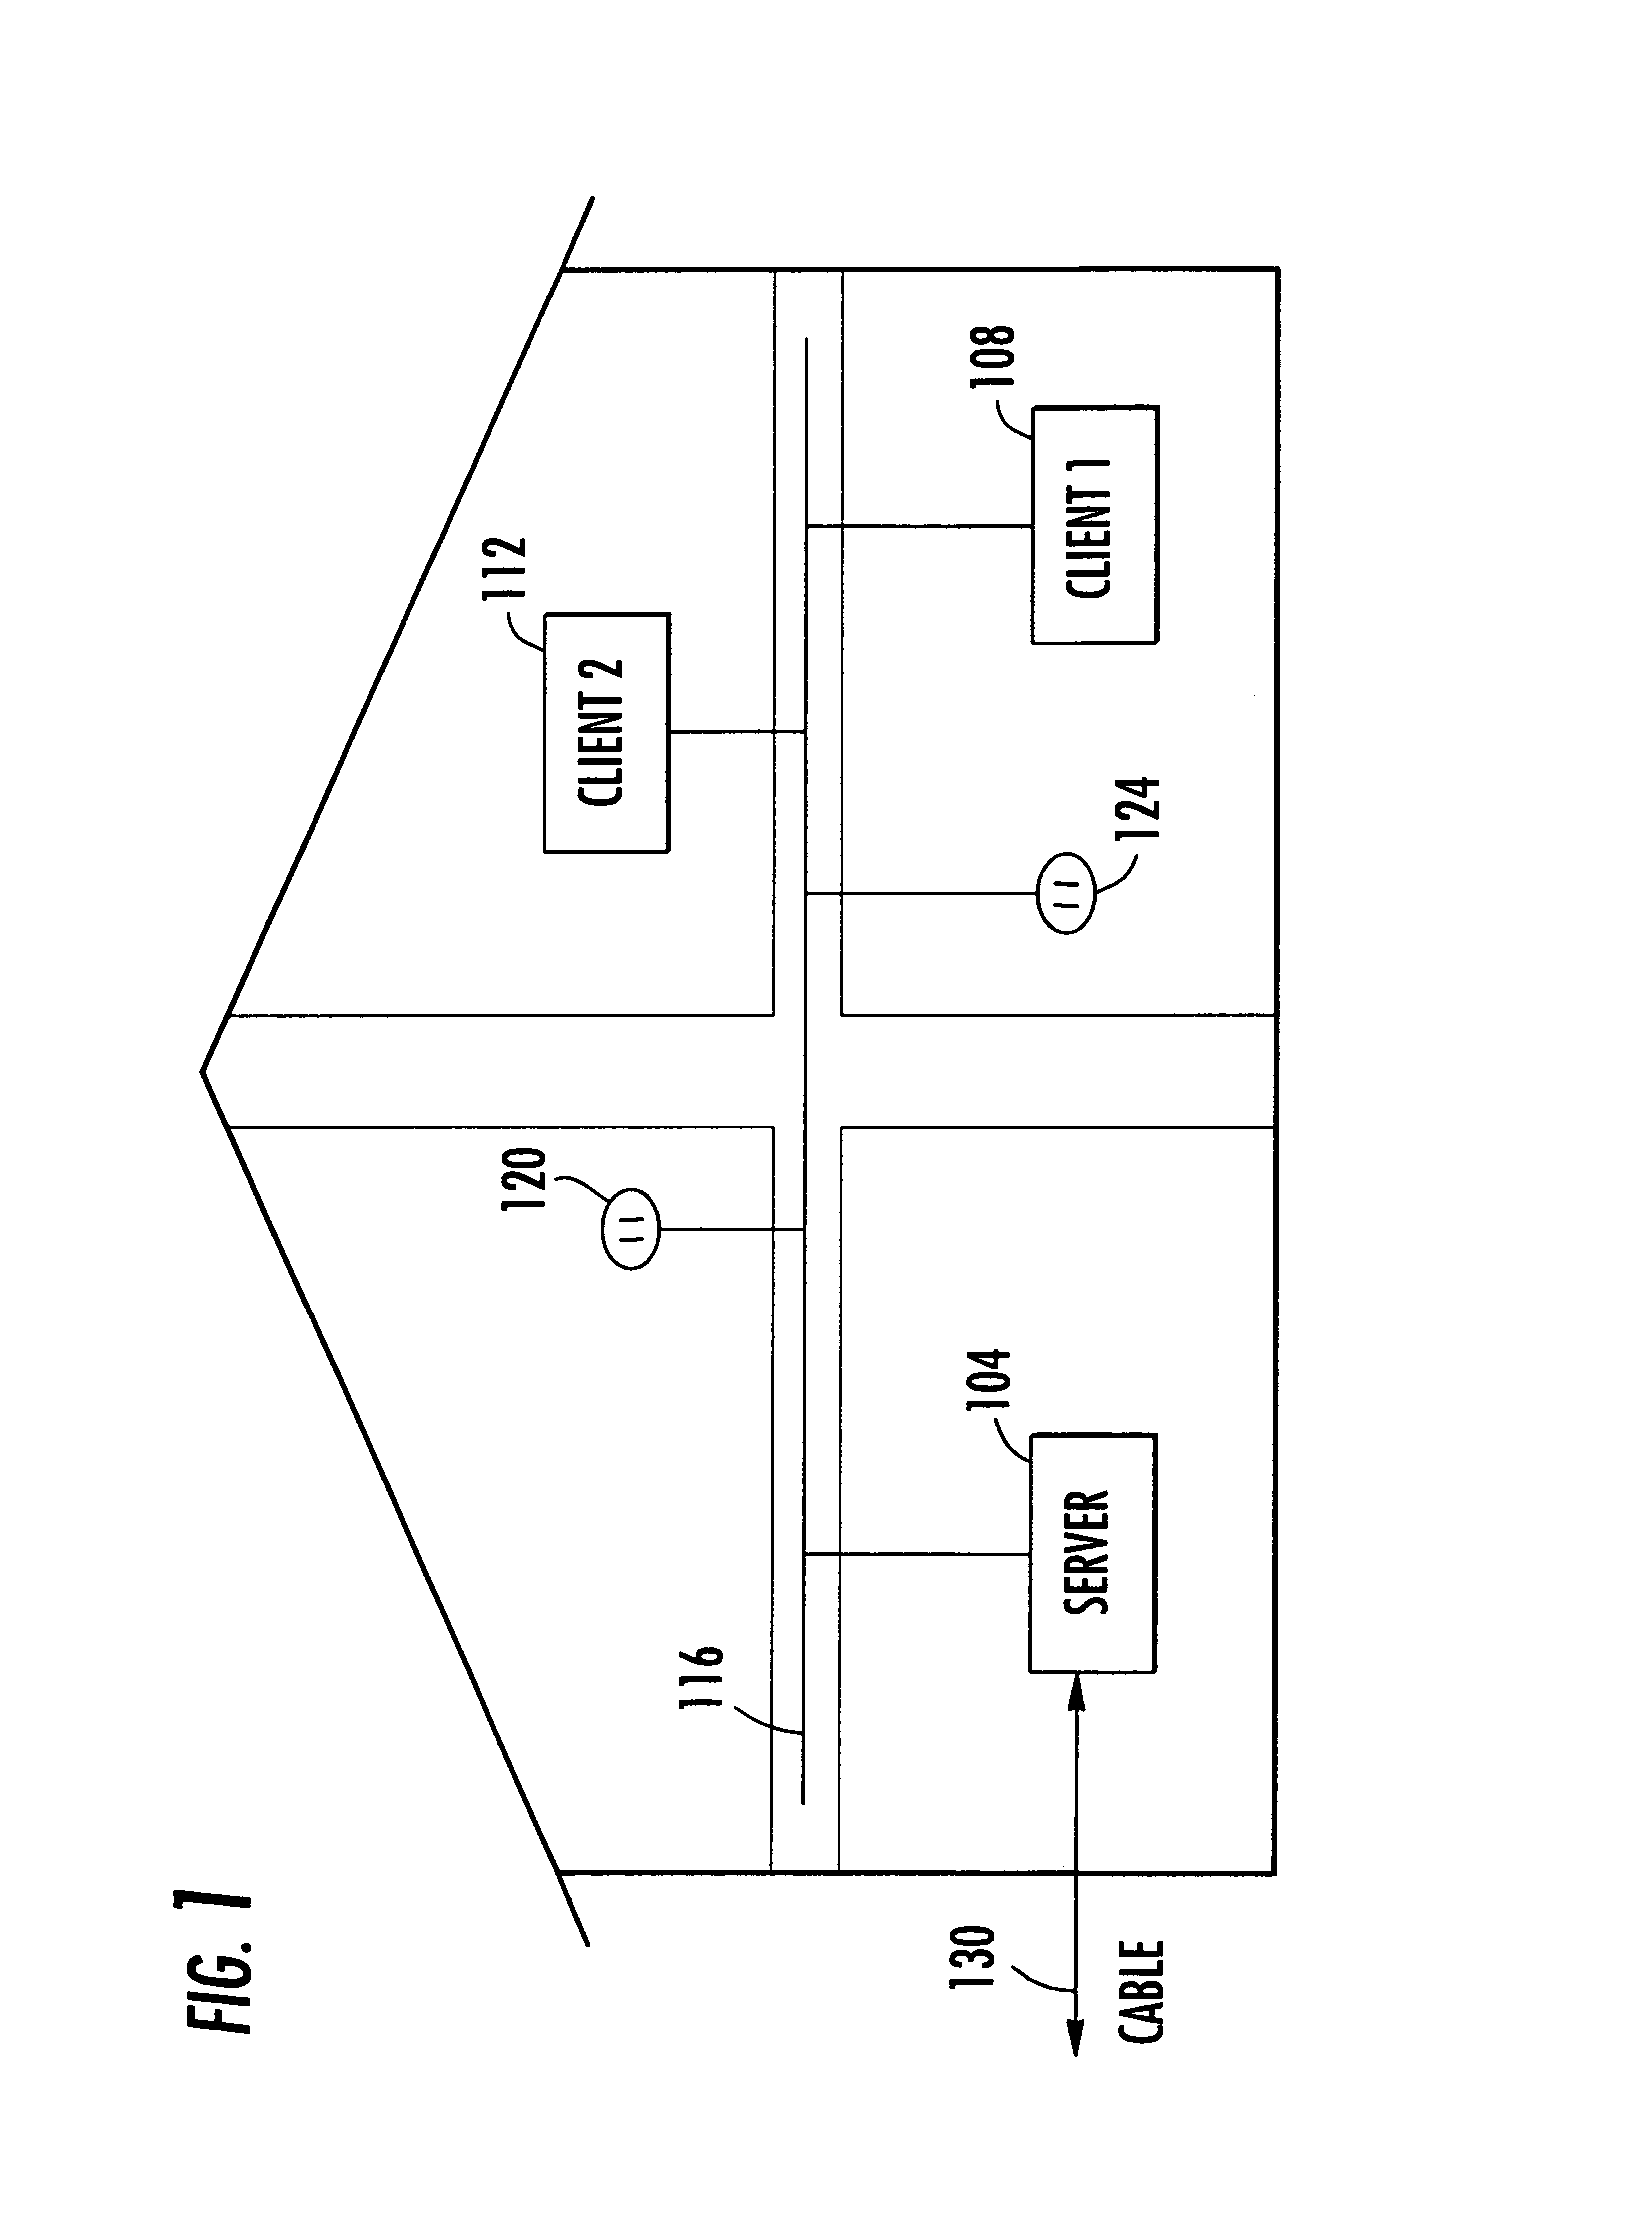 Time slot and carrier frequency allocation in a network